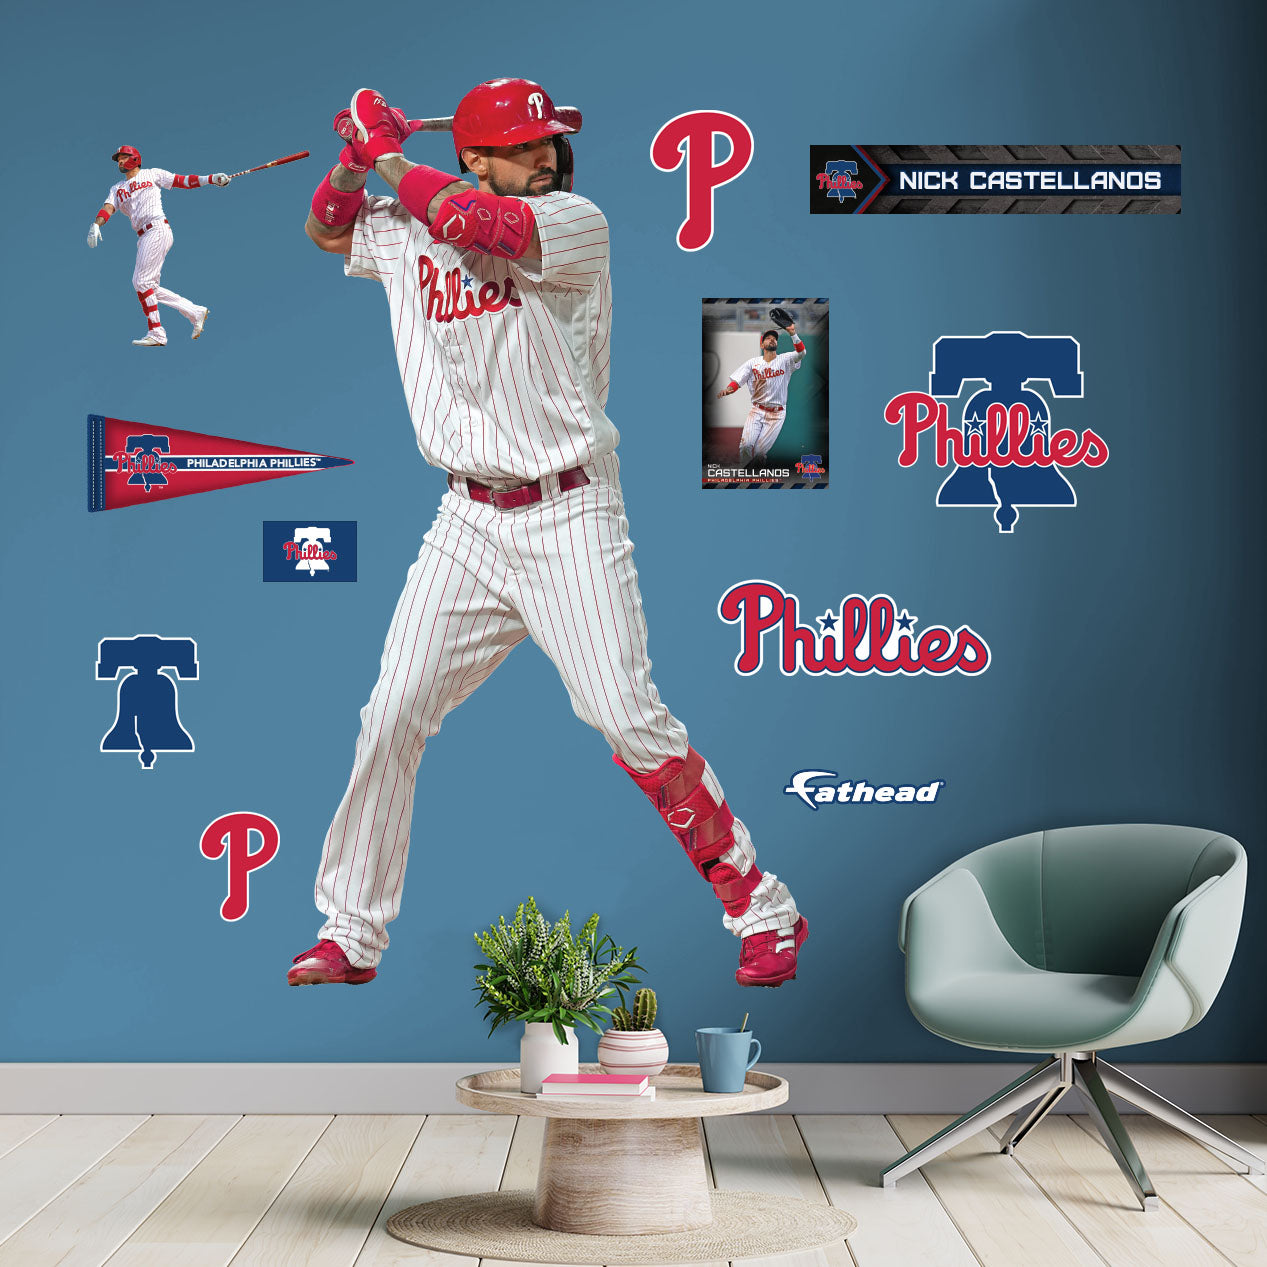 100+] Phillies Wallpapers